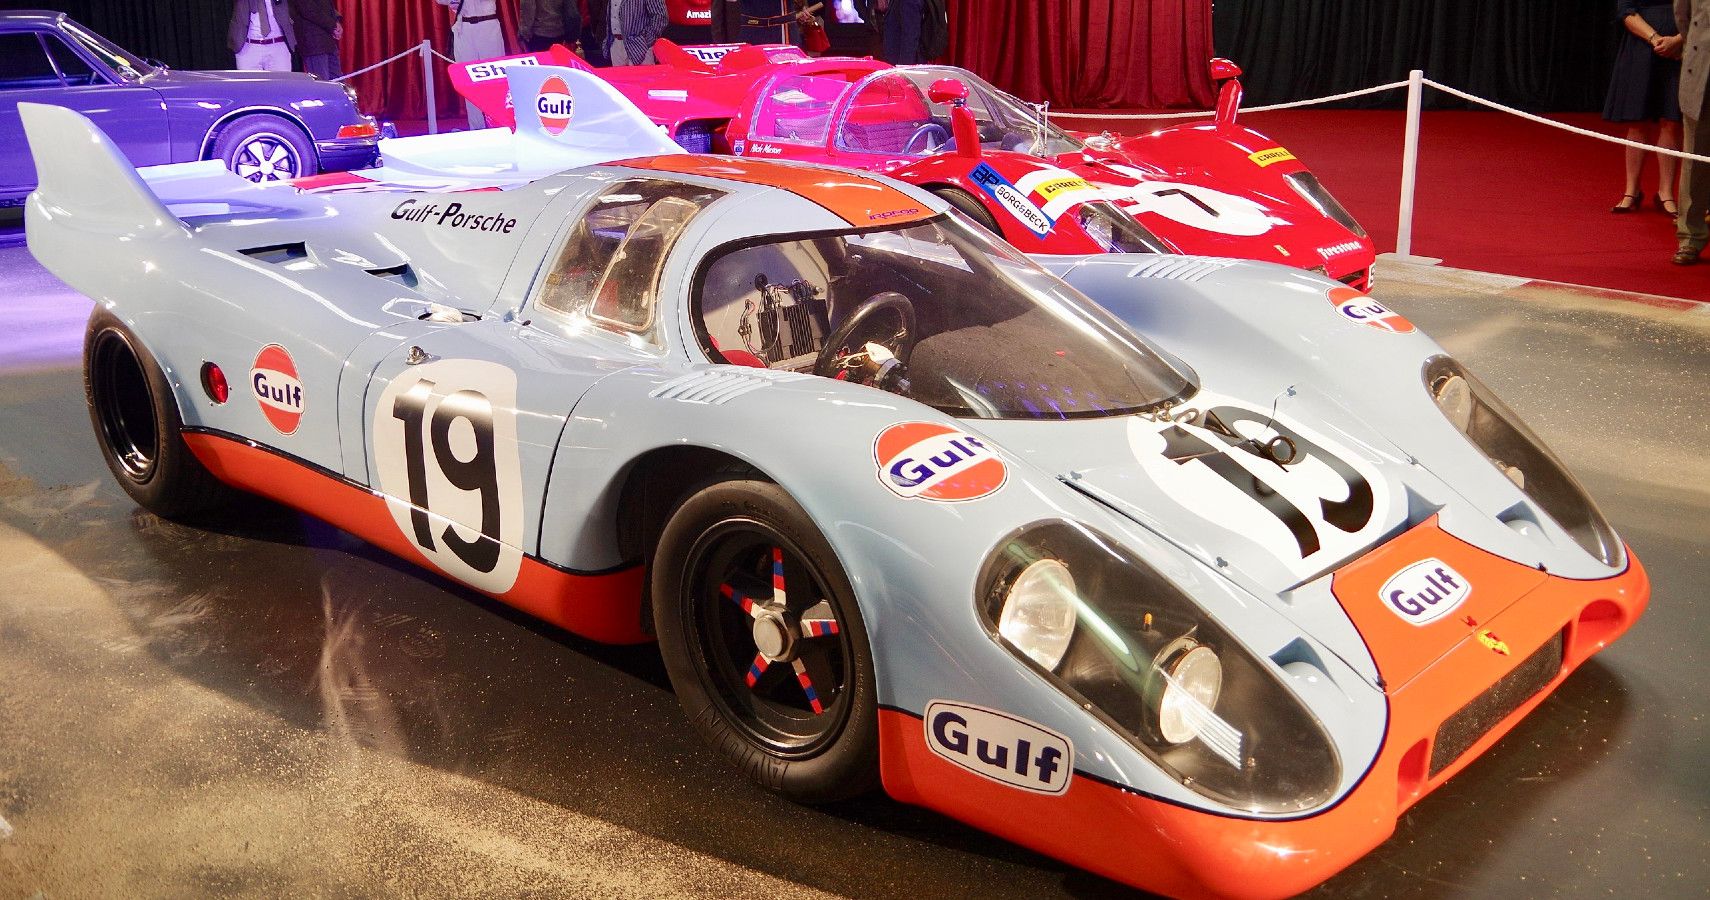 The Real Story Behind Steve McQueen’s Porsche 917 In ‘Le Mans’